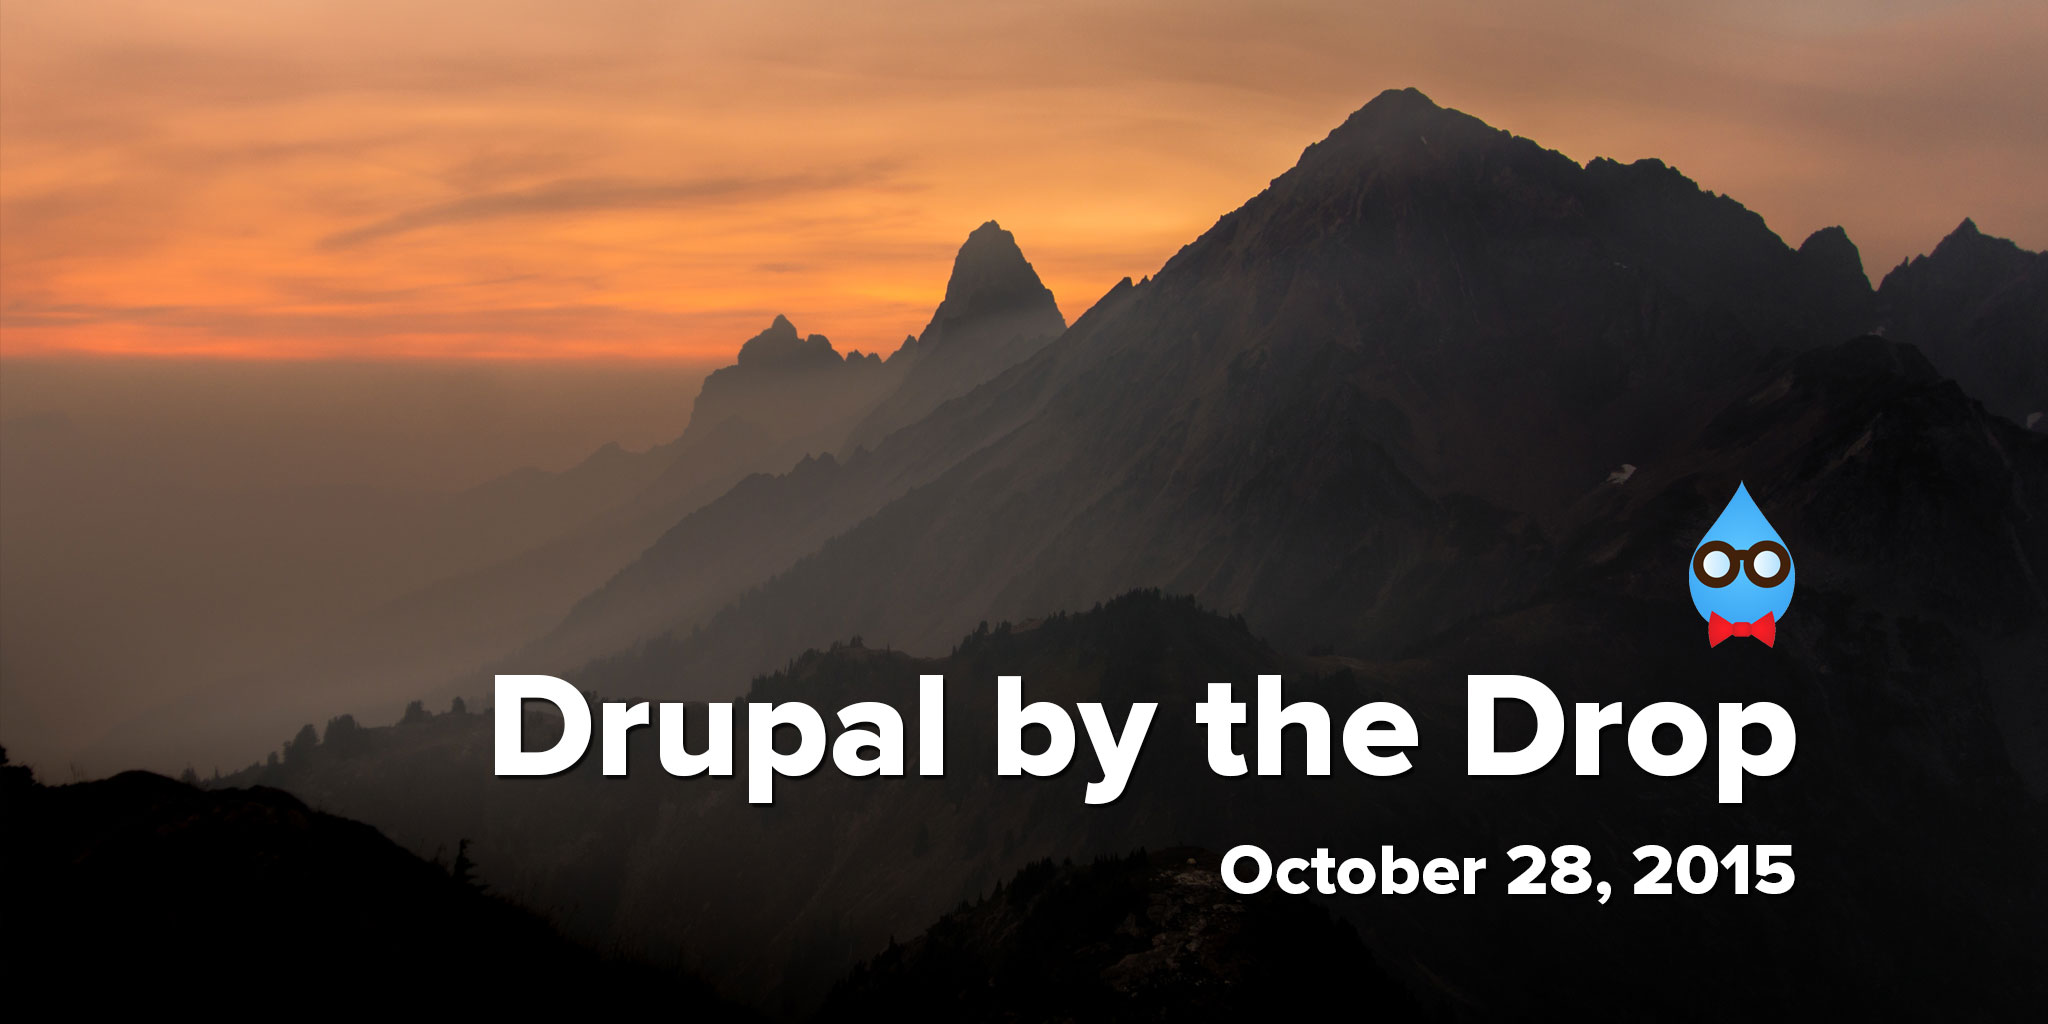 Drupal by the Drop: October 28, 2015